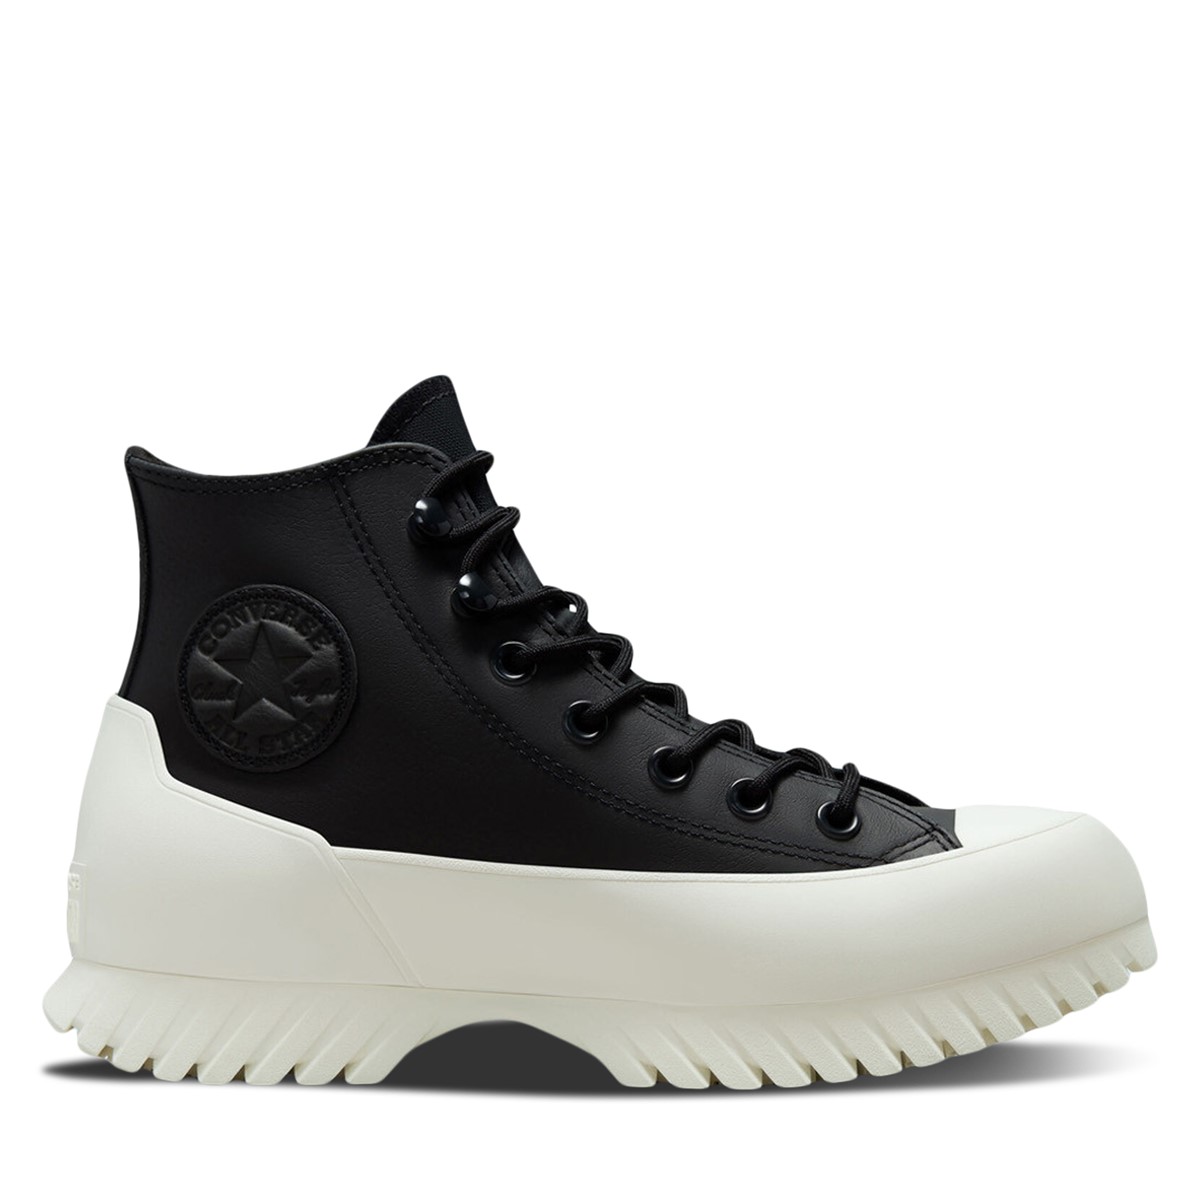 Chuck Taylor All Star Lugged 2.0 Sneaker Boots in Black/White